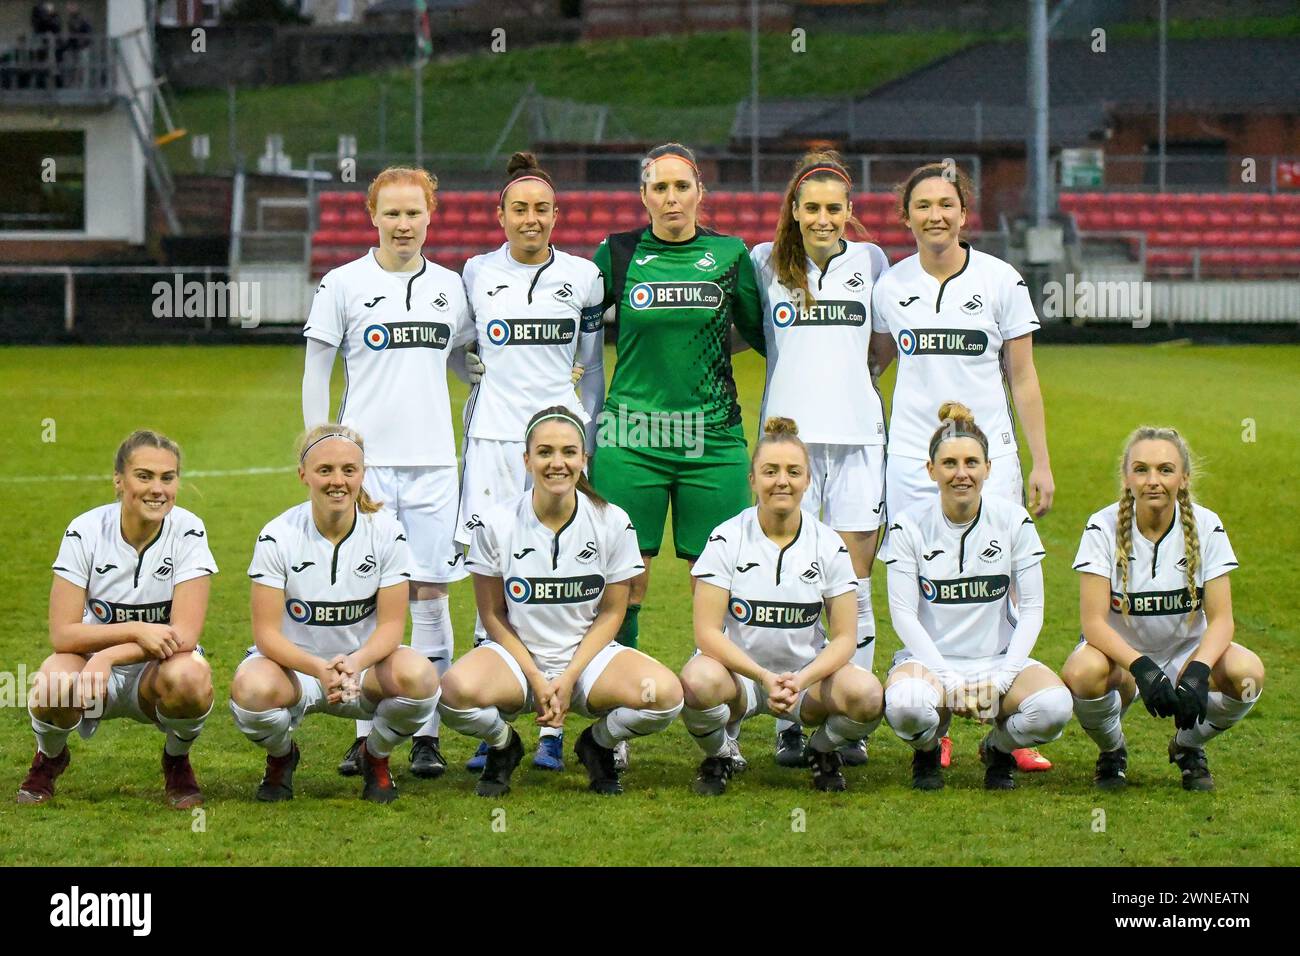 Llanelli, Wales. 5 April 2019. The Swansea City Ladies team photograph before the Welsh Premier Women's League Cup Final between Cardiff Met Women and Swansea City Ladies at Stebonheath Park in Llanelli, Wales, UK on 5 April 2019. Credit: Duncan Thomas/Majestic Media. Stock Photo